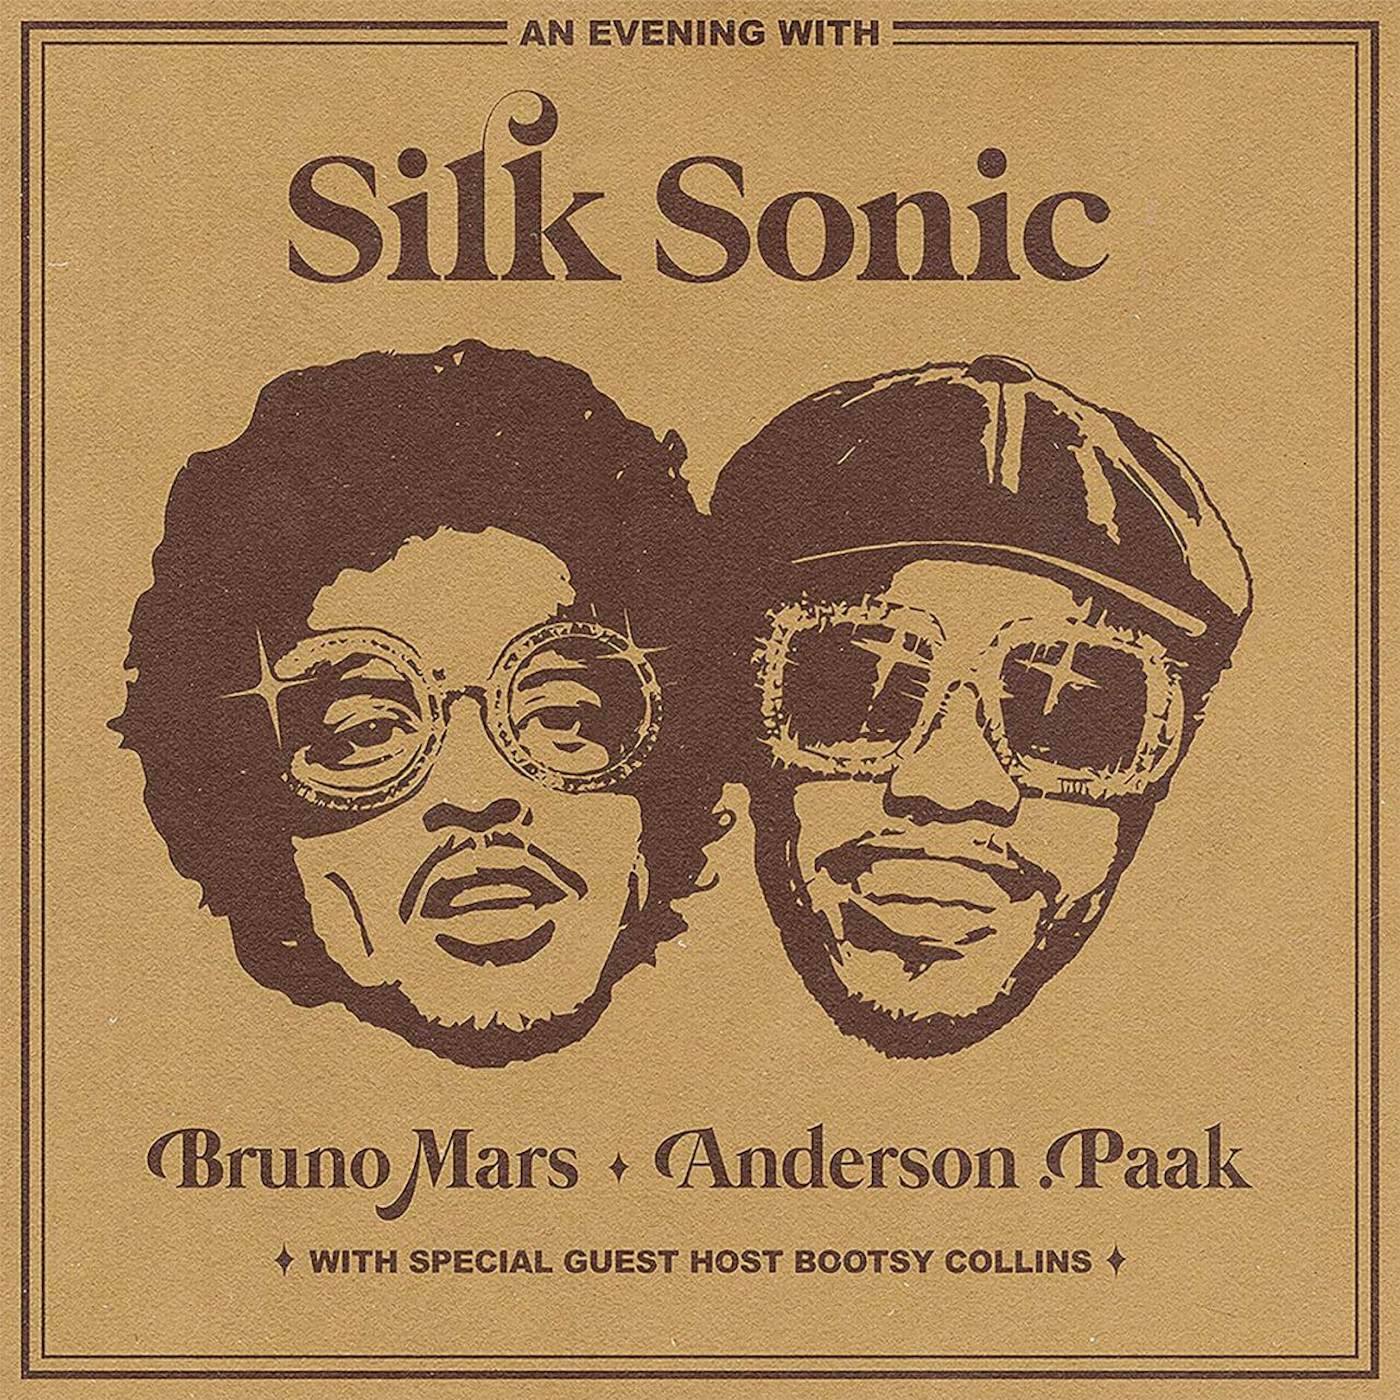 An Evening With Silk Sonic Vinyl Record